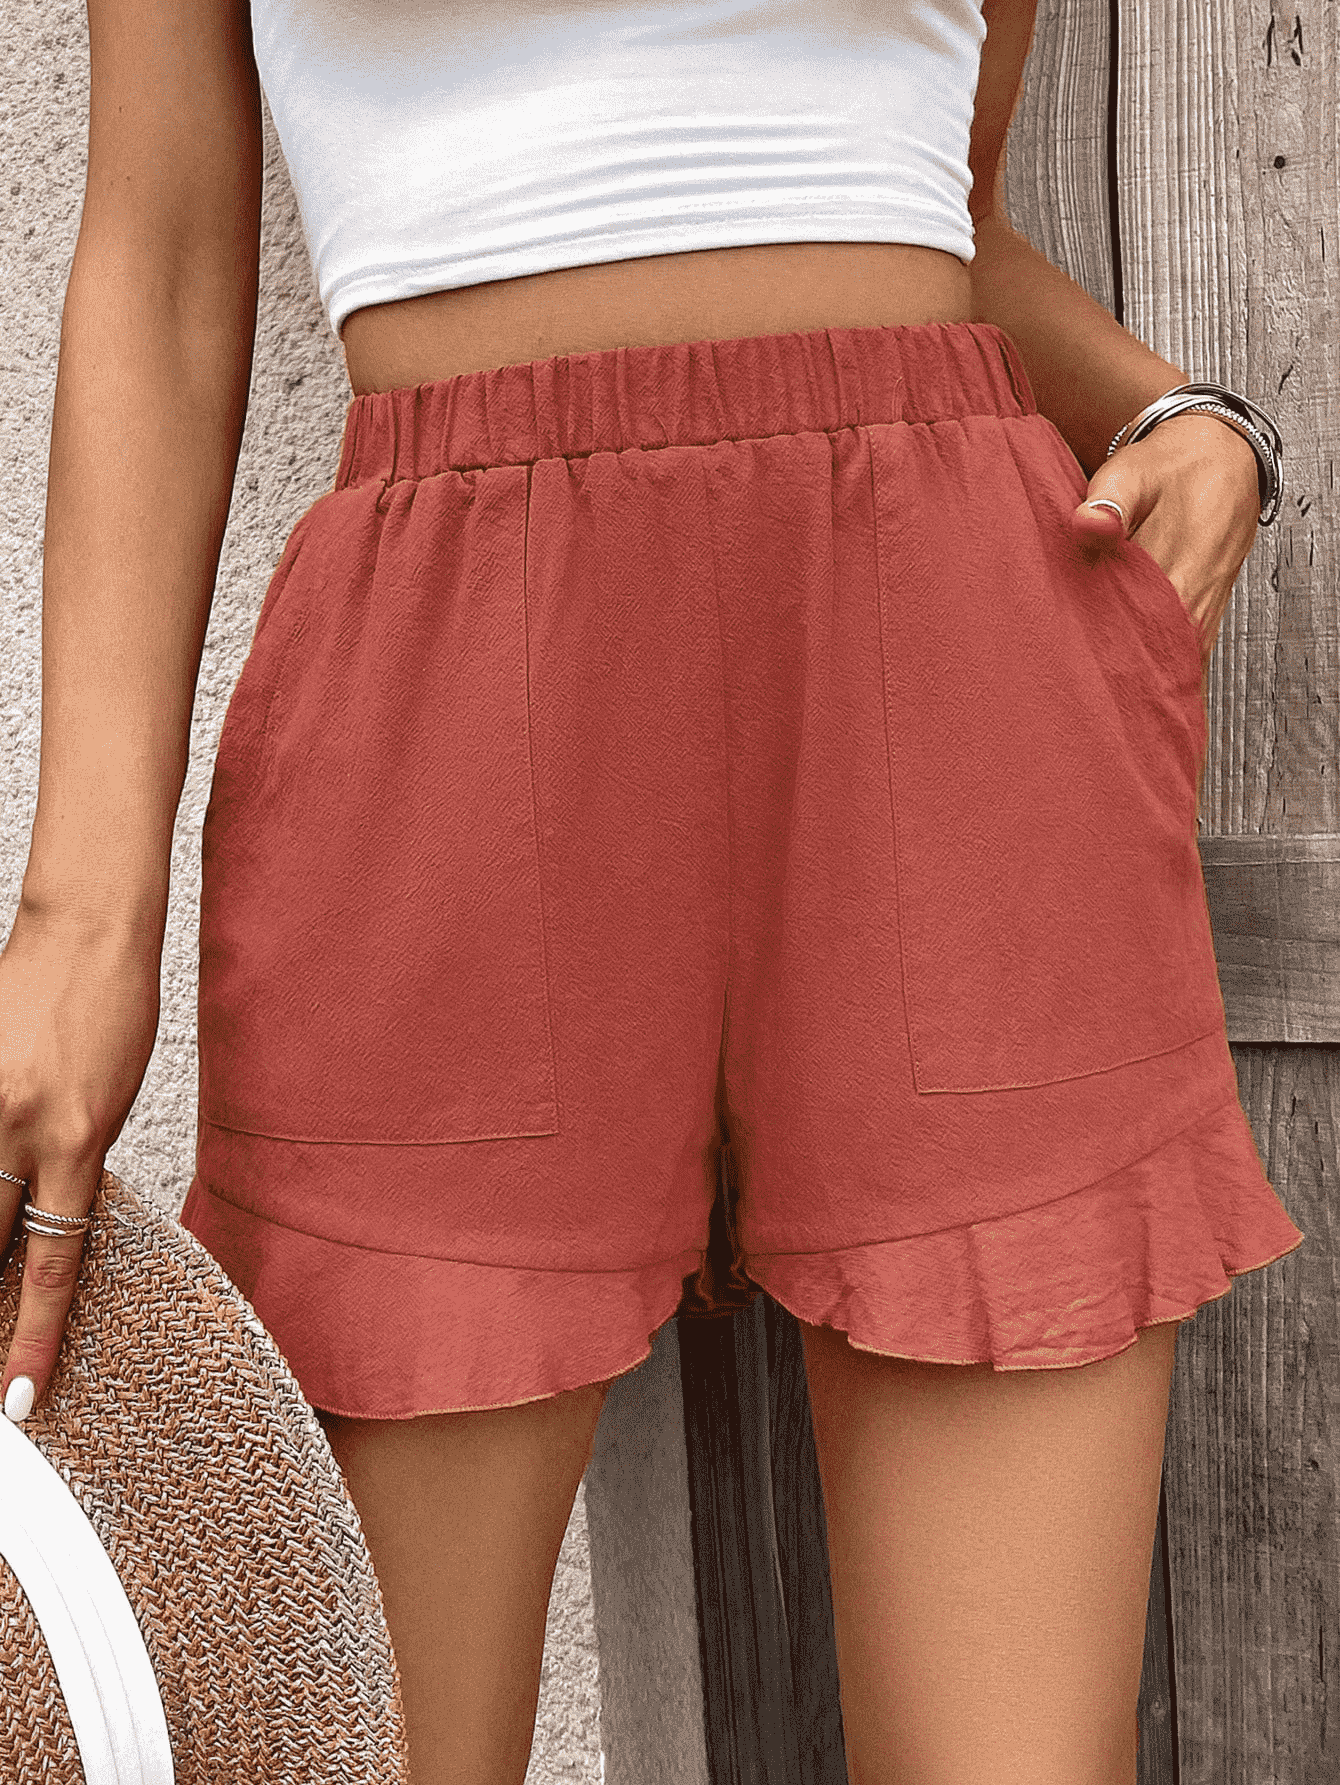 Ruffle Trim Shorts with Pocket - Women’s Clothing & Accessories - Shorts - 6 - 2024